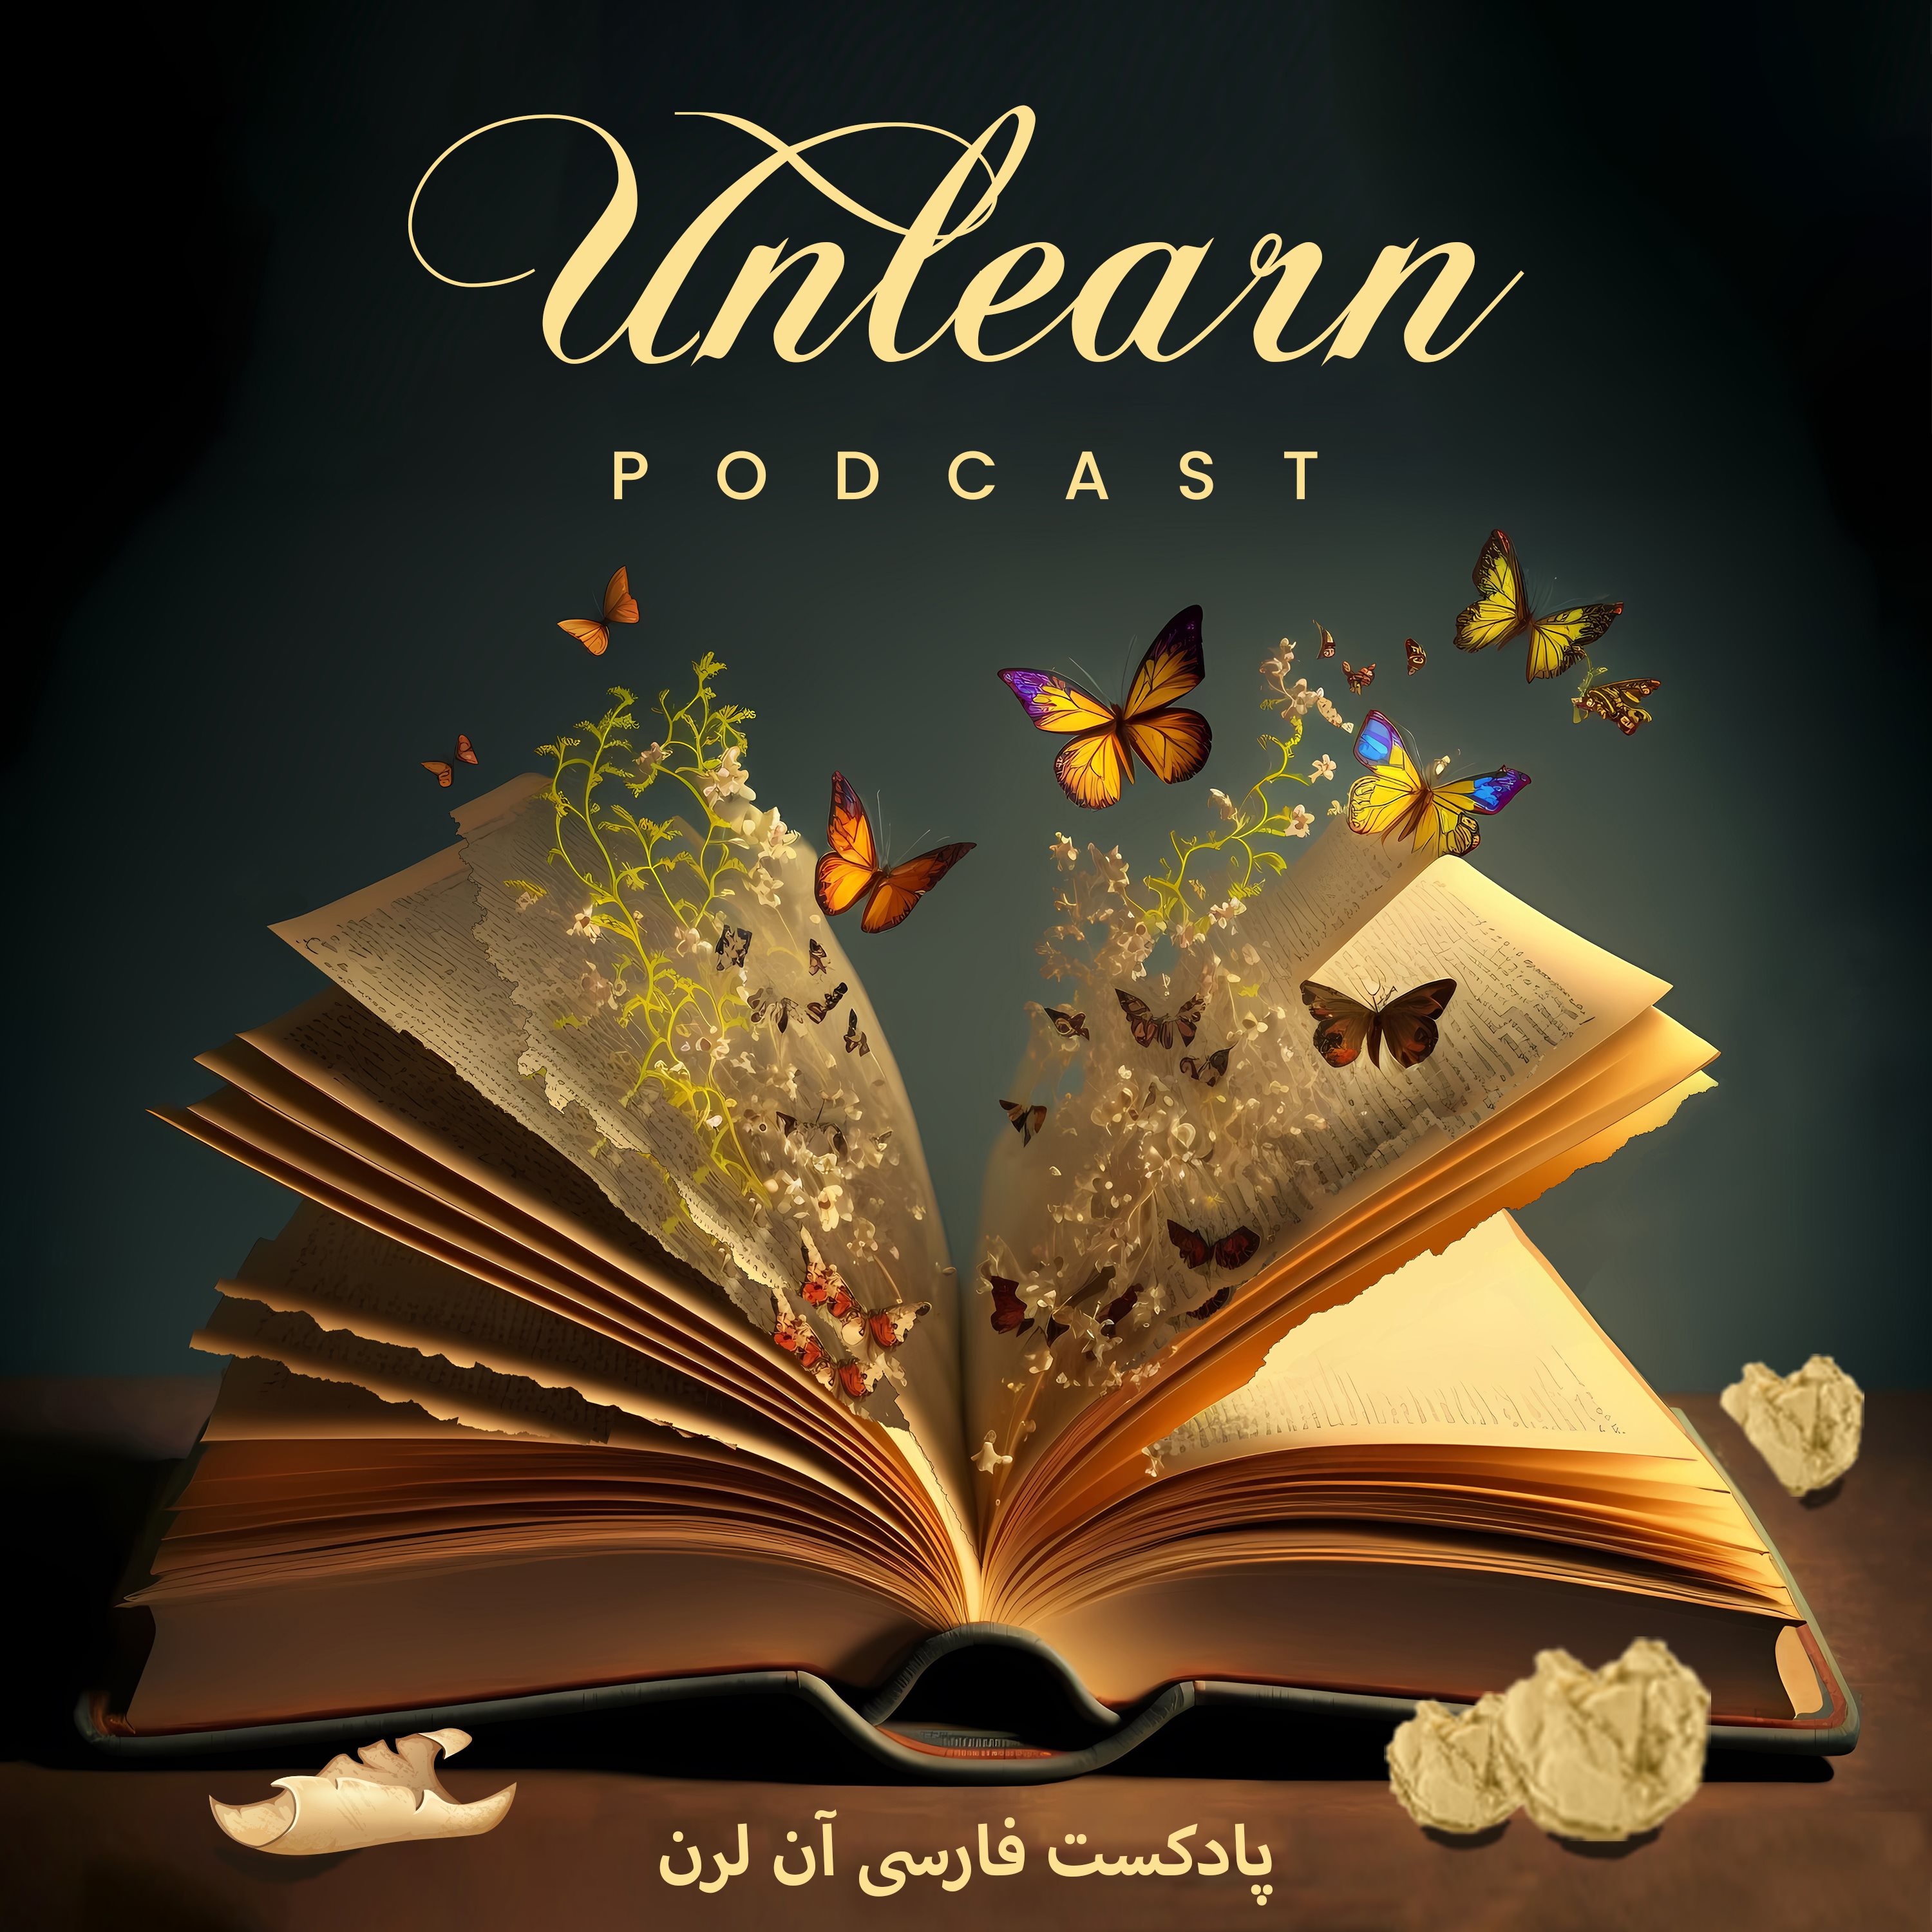 Unlearn Podcast